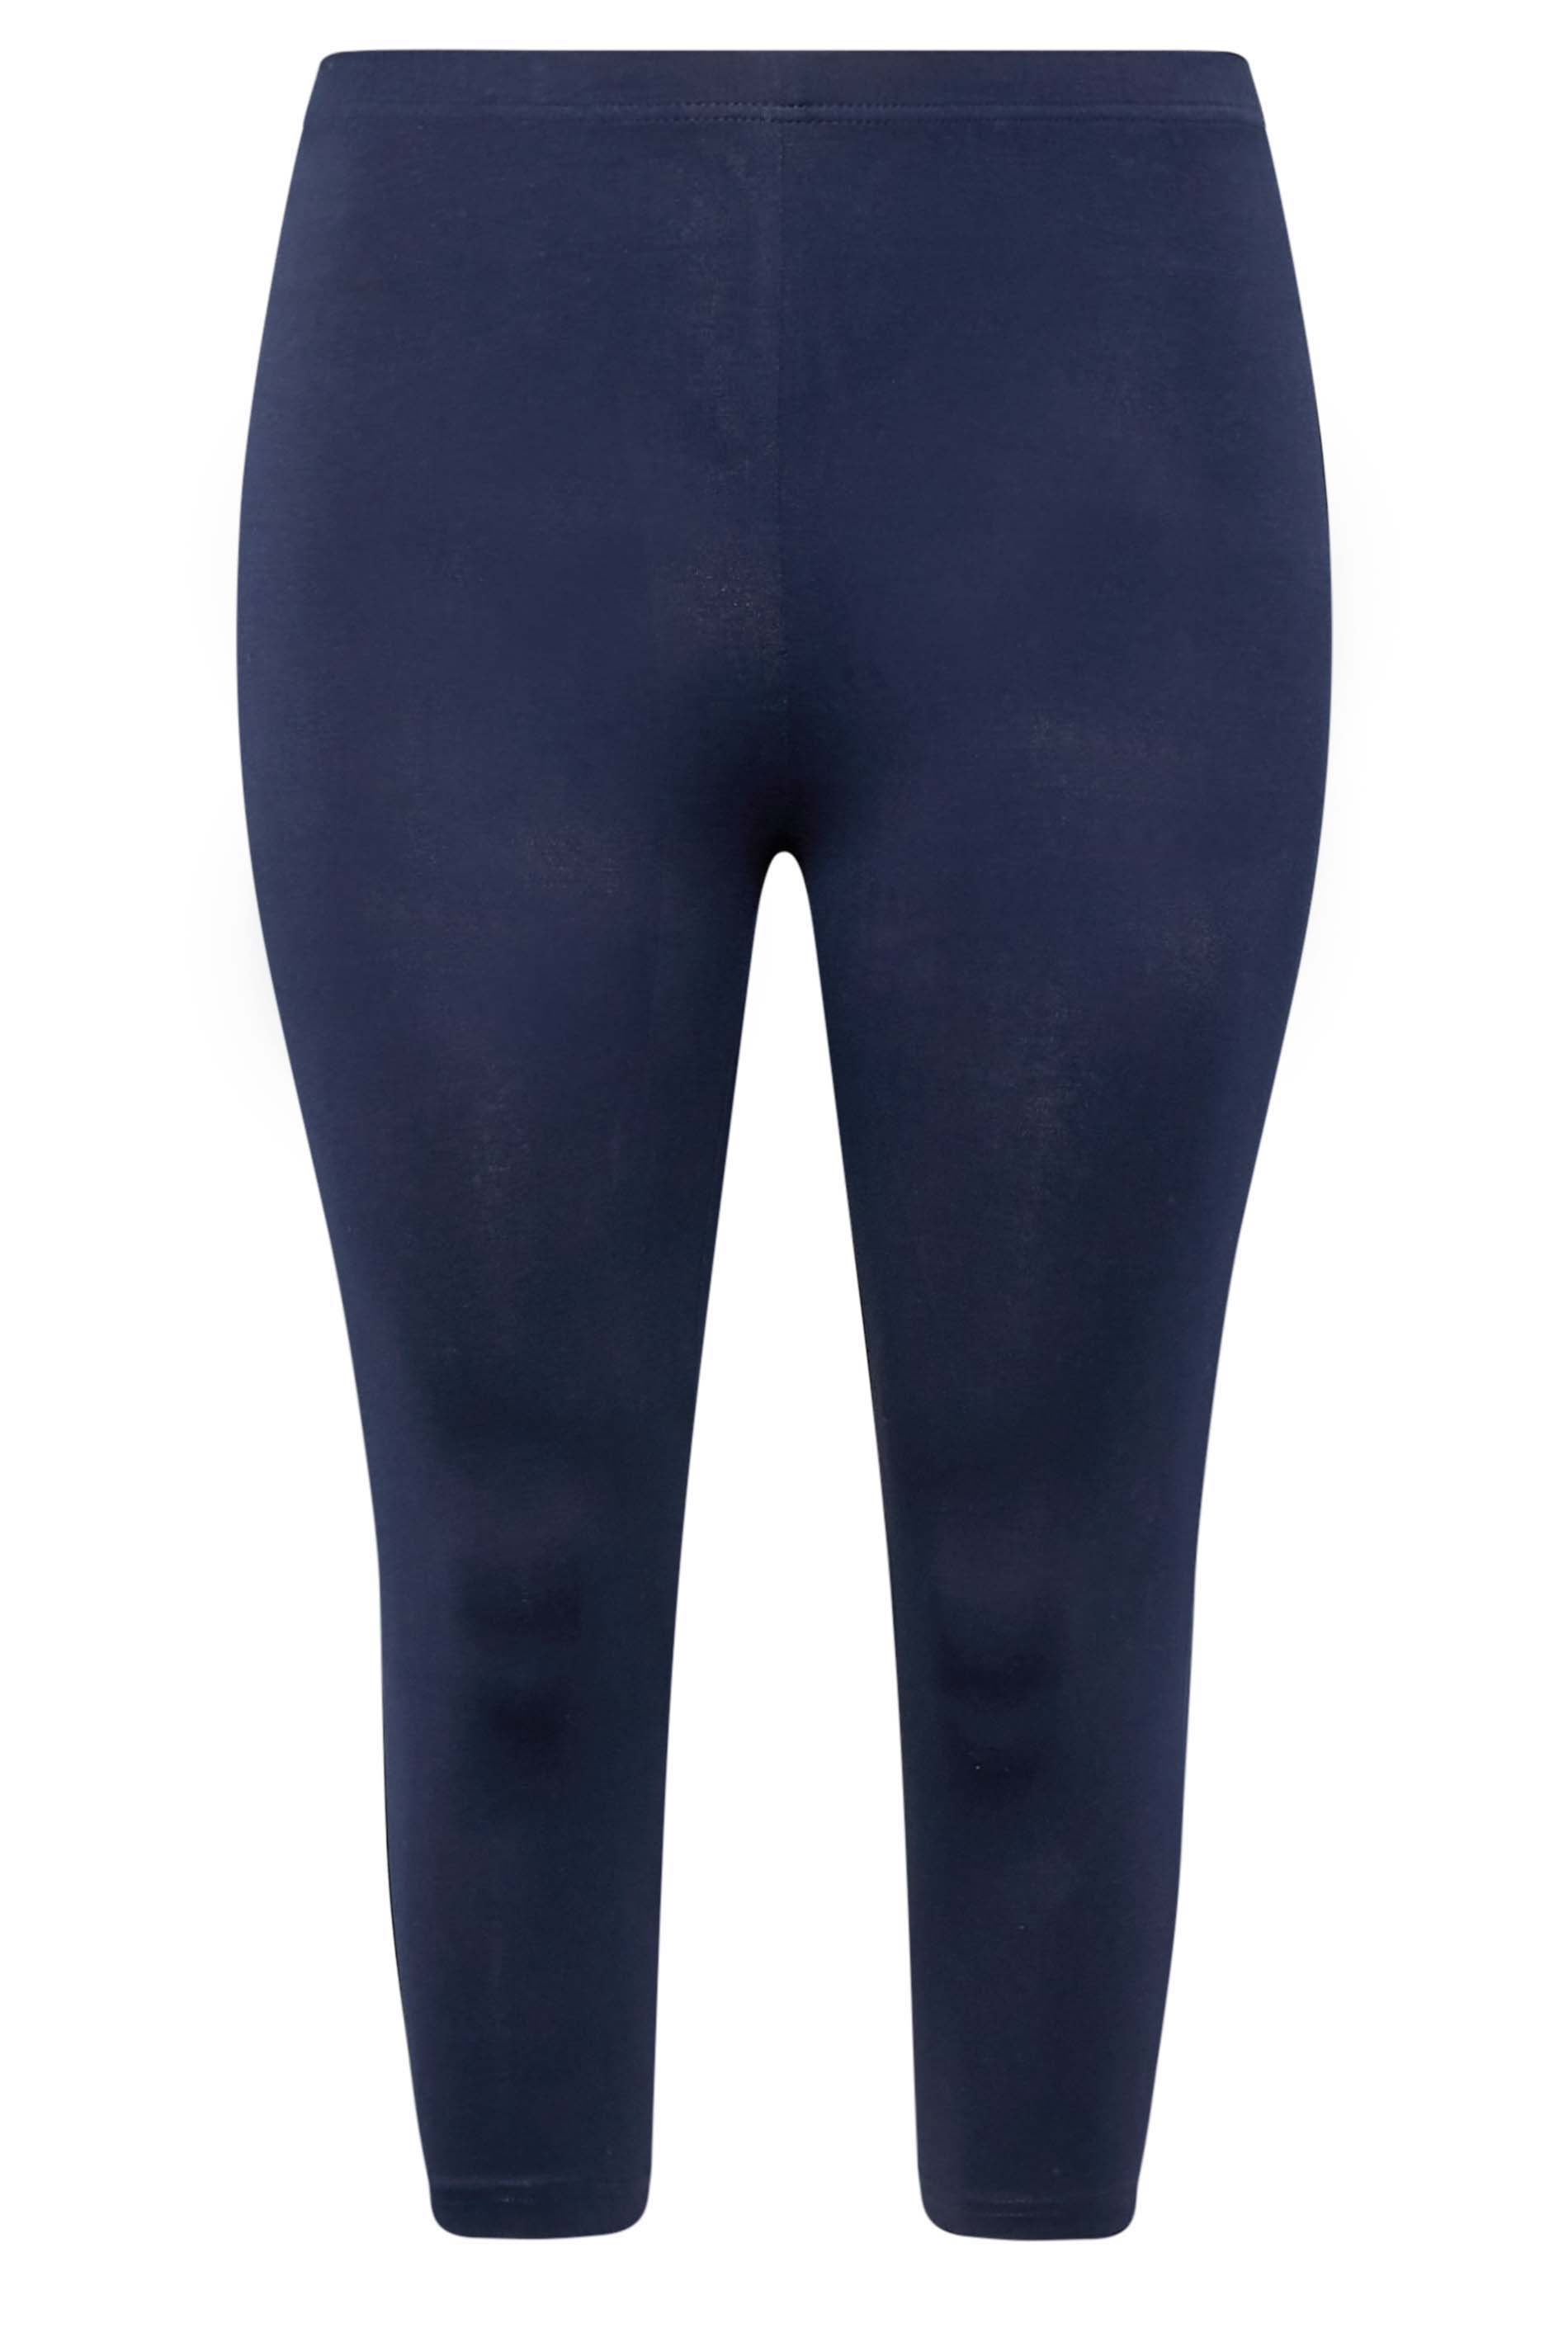 YOURS Curve Plus Size Navy Blue Cropped Leggings | Yours Clothing